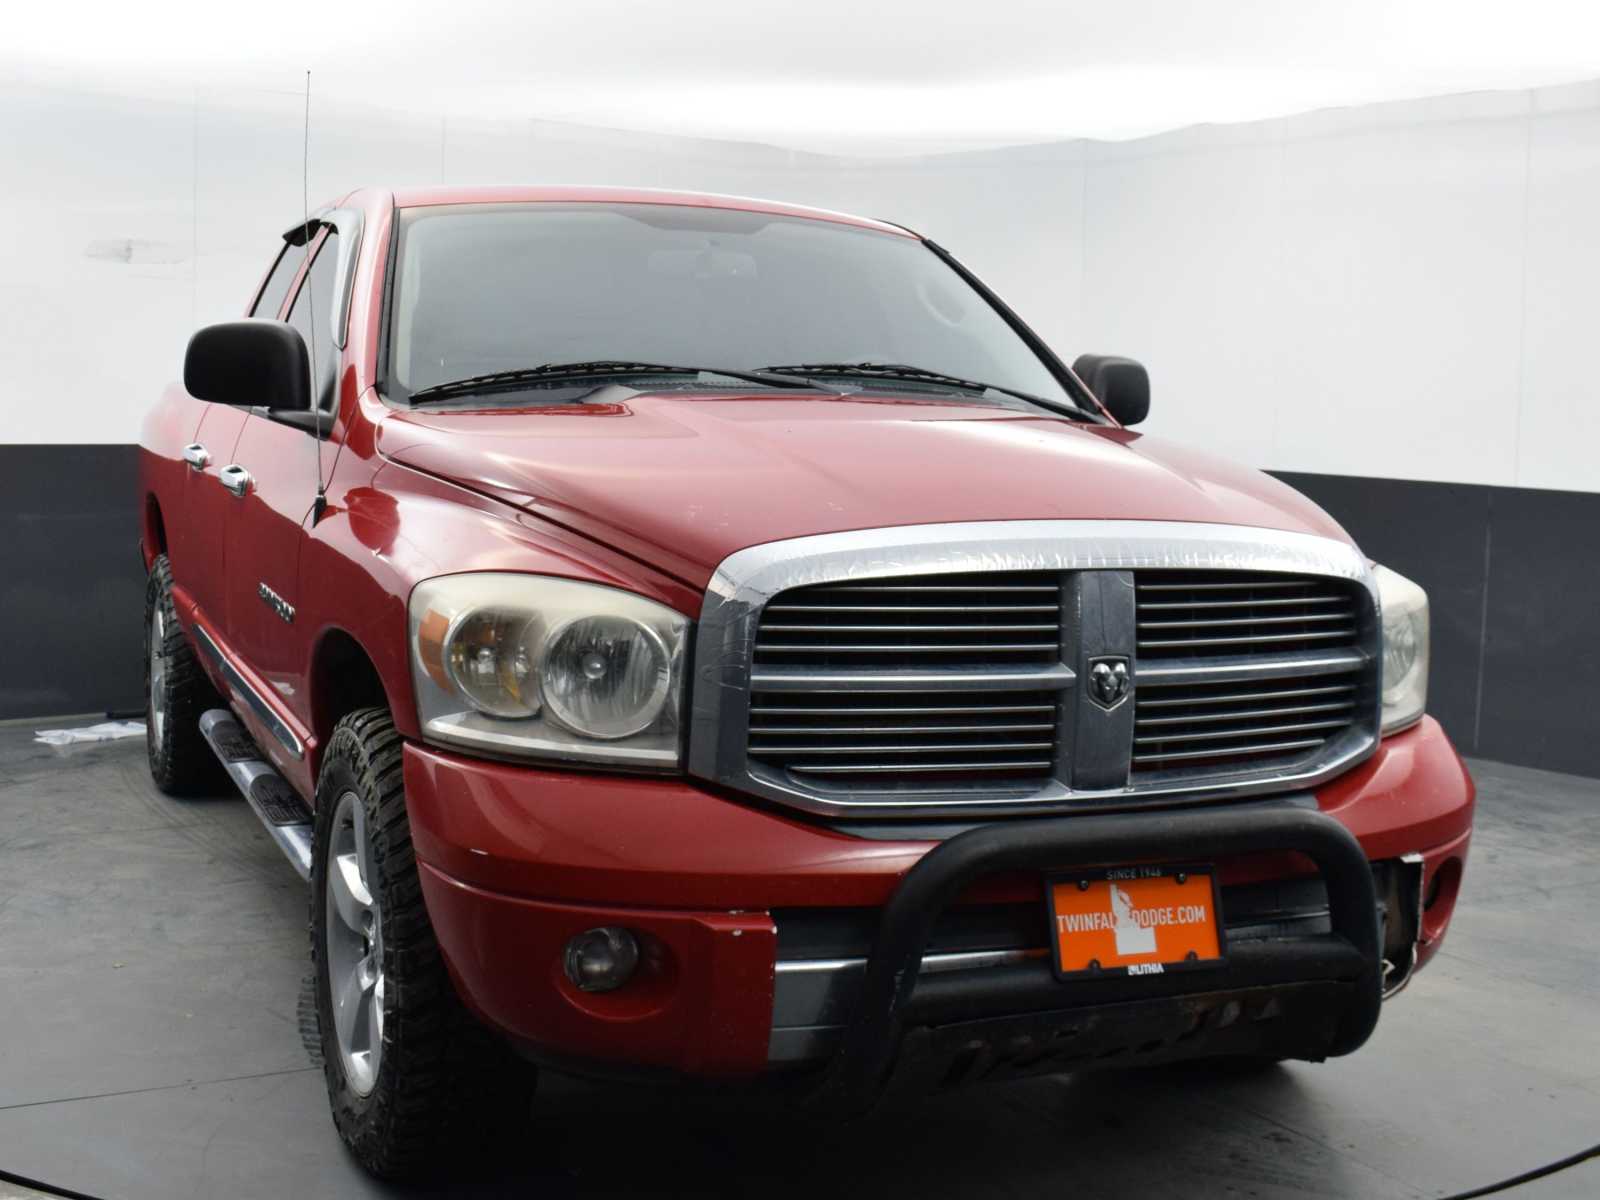 Used 2007 Dodge Ram 1500 Pickup Laramie with VIN 1D7HU18237S220577 for sale in Twin Falls, ID